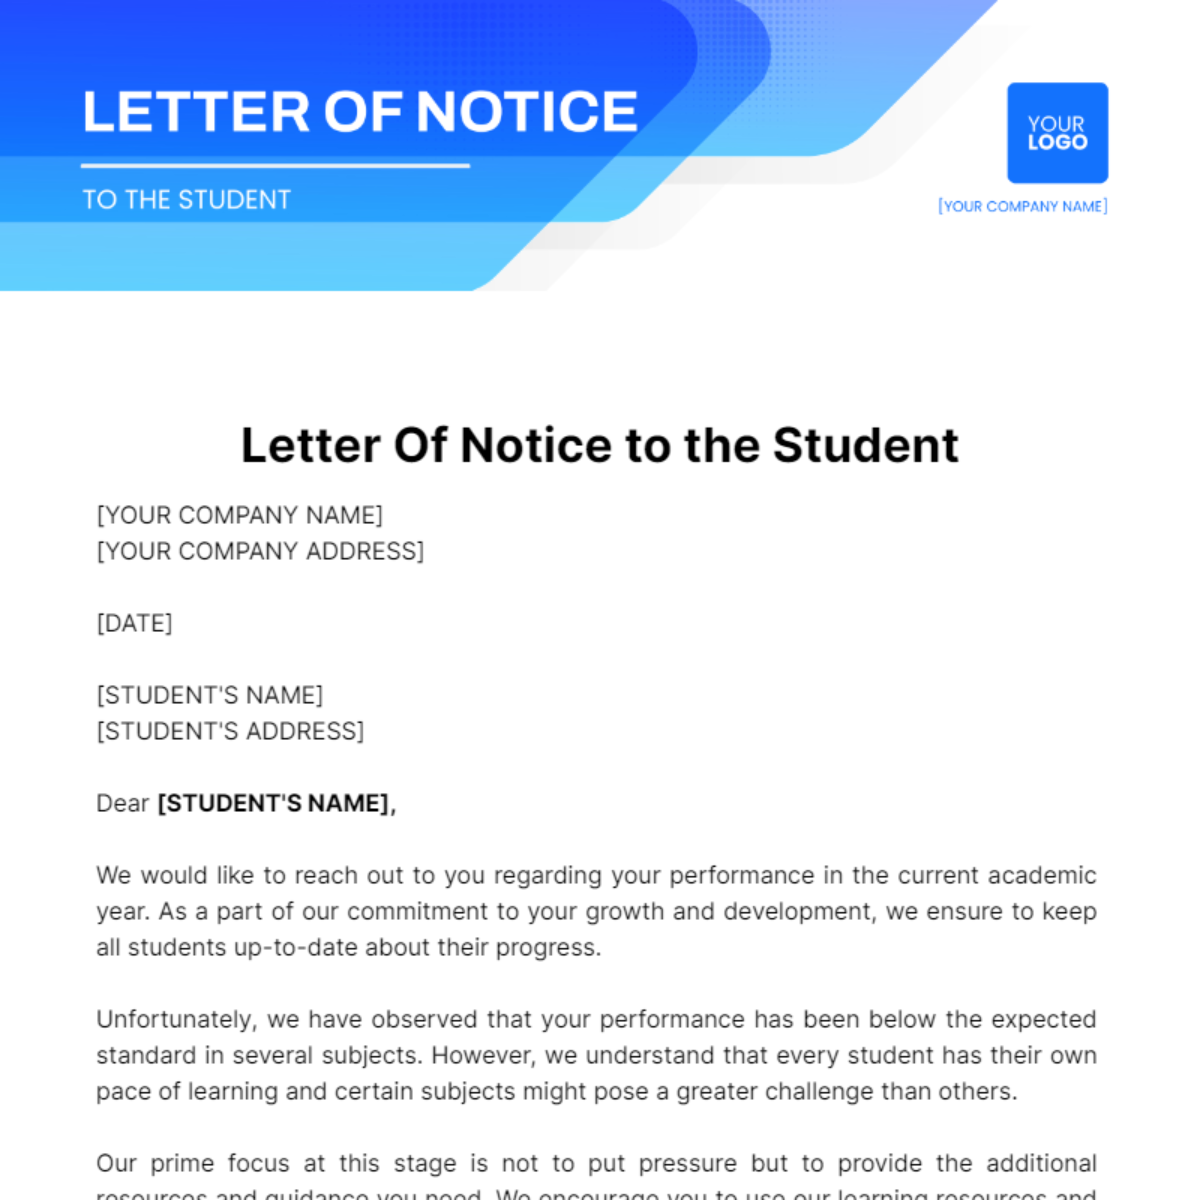 Free Letter Of Notice to the Student Template